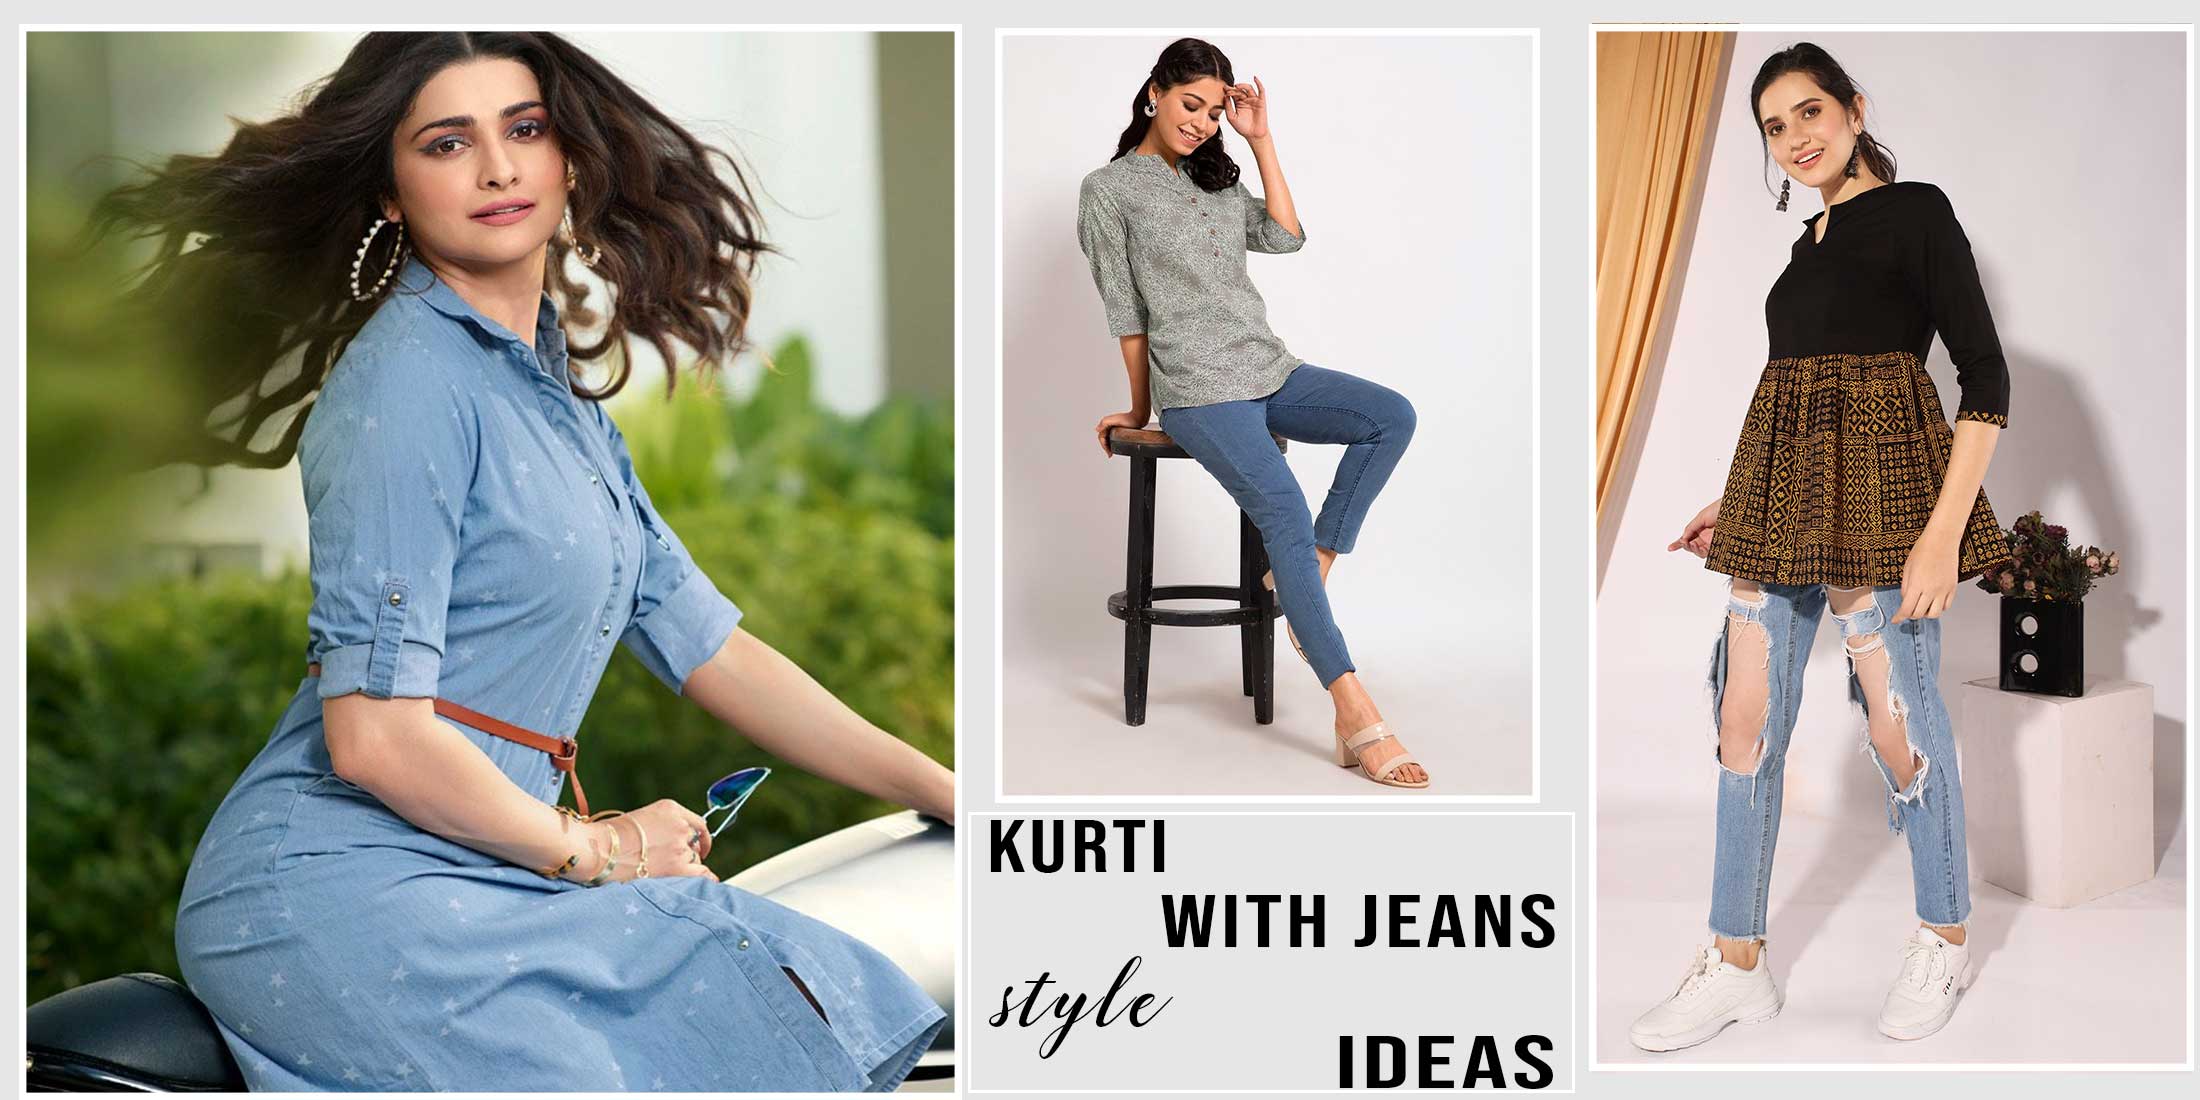 STYLISH CASUAL SHORT KURTI DESIGNS FOR JEANS  TOPS ON JEANS  YouTube